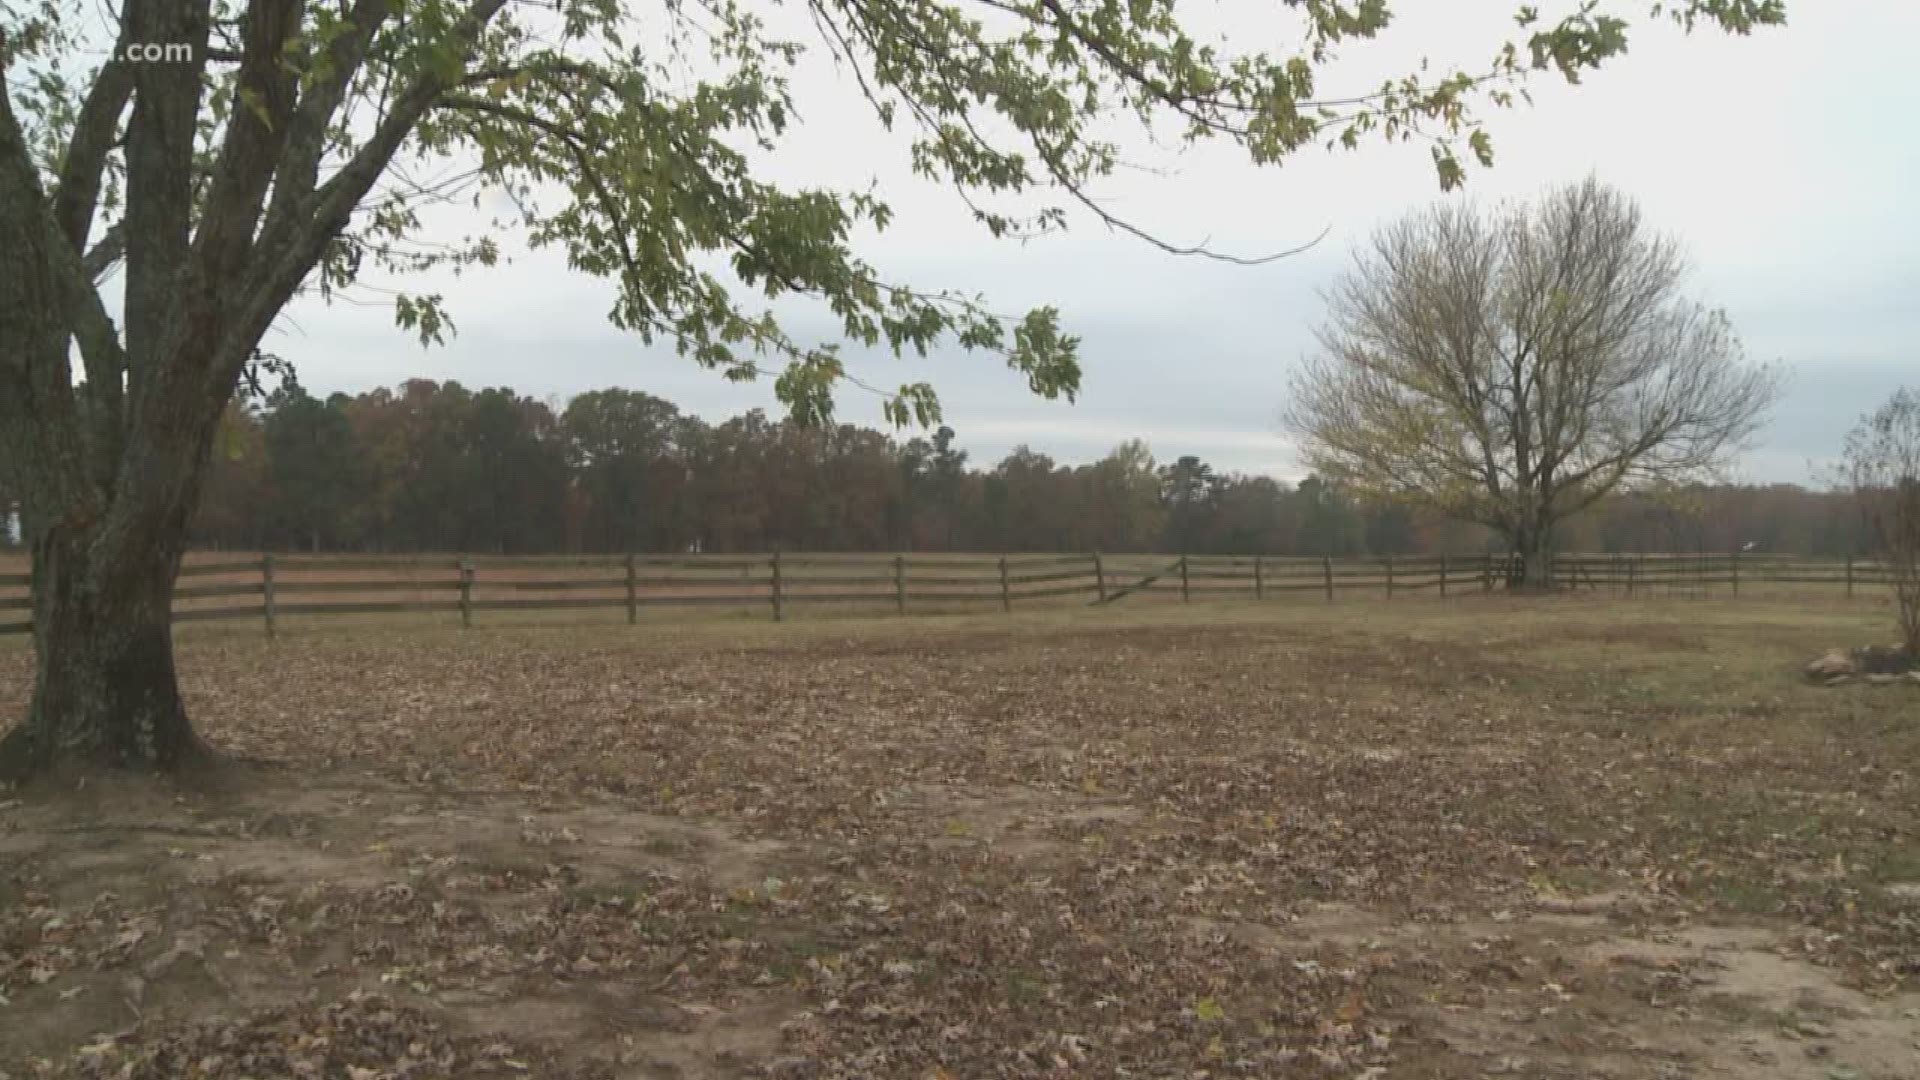 Concerns over Lake Maumelle Watershed Zoning Code